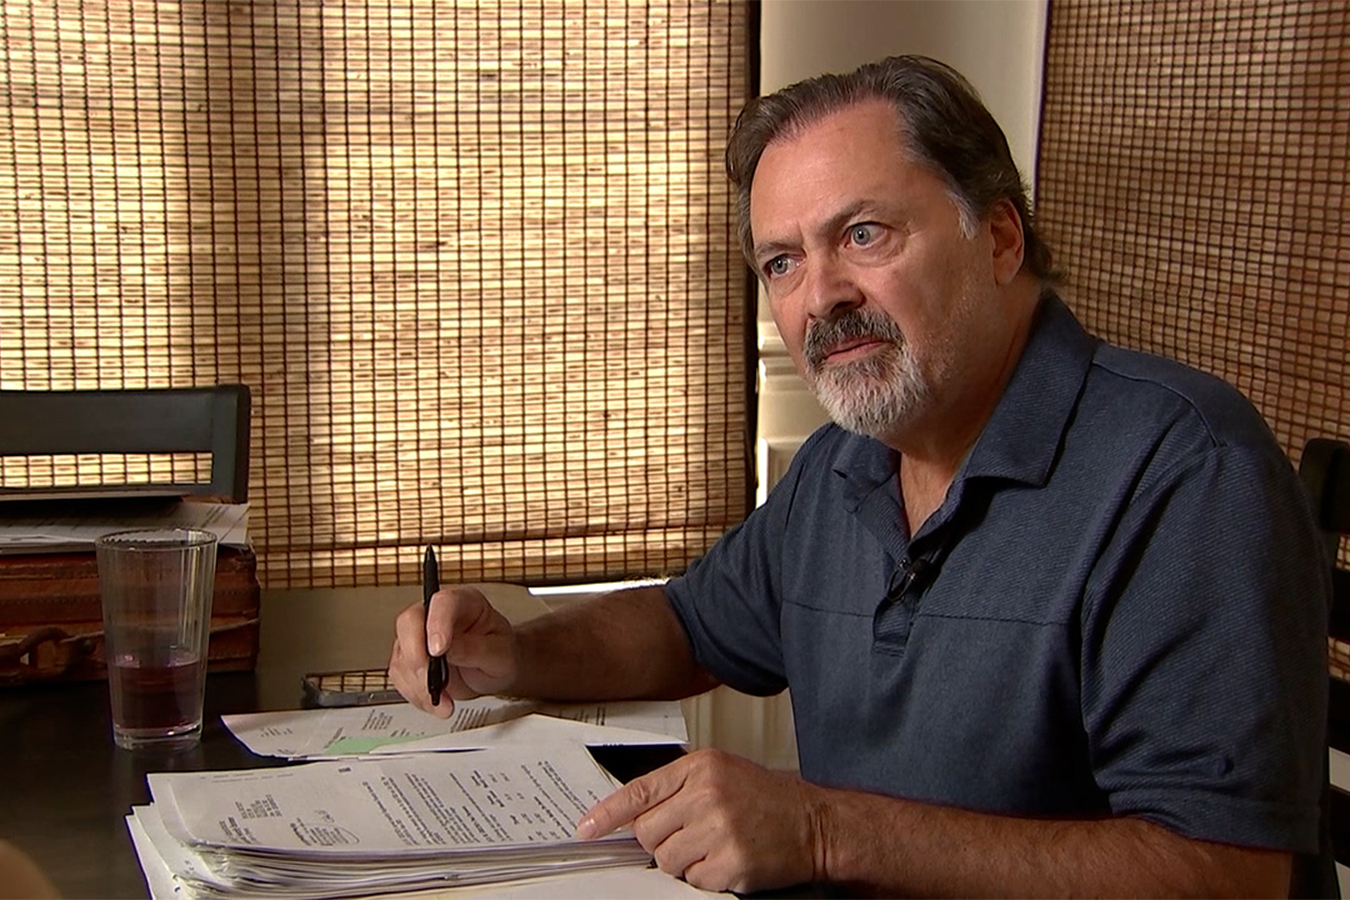 A photo of a man sitting with a pen and paperwork, looking at an interviewer out of frame.